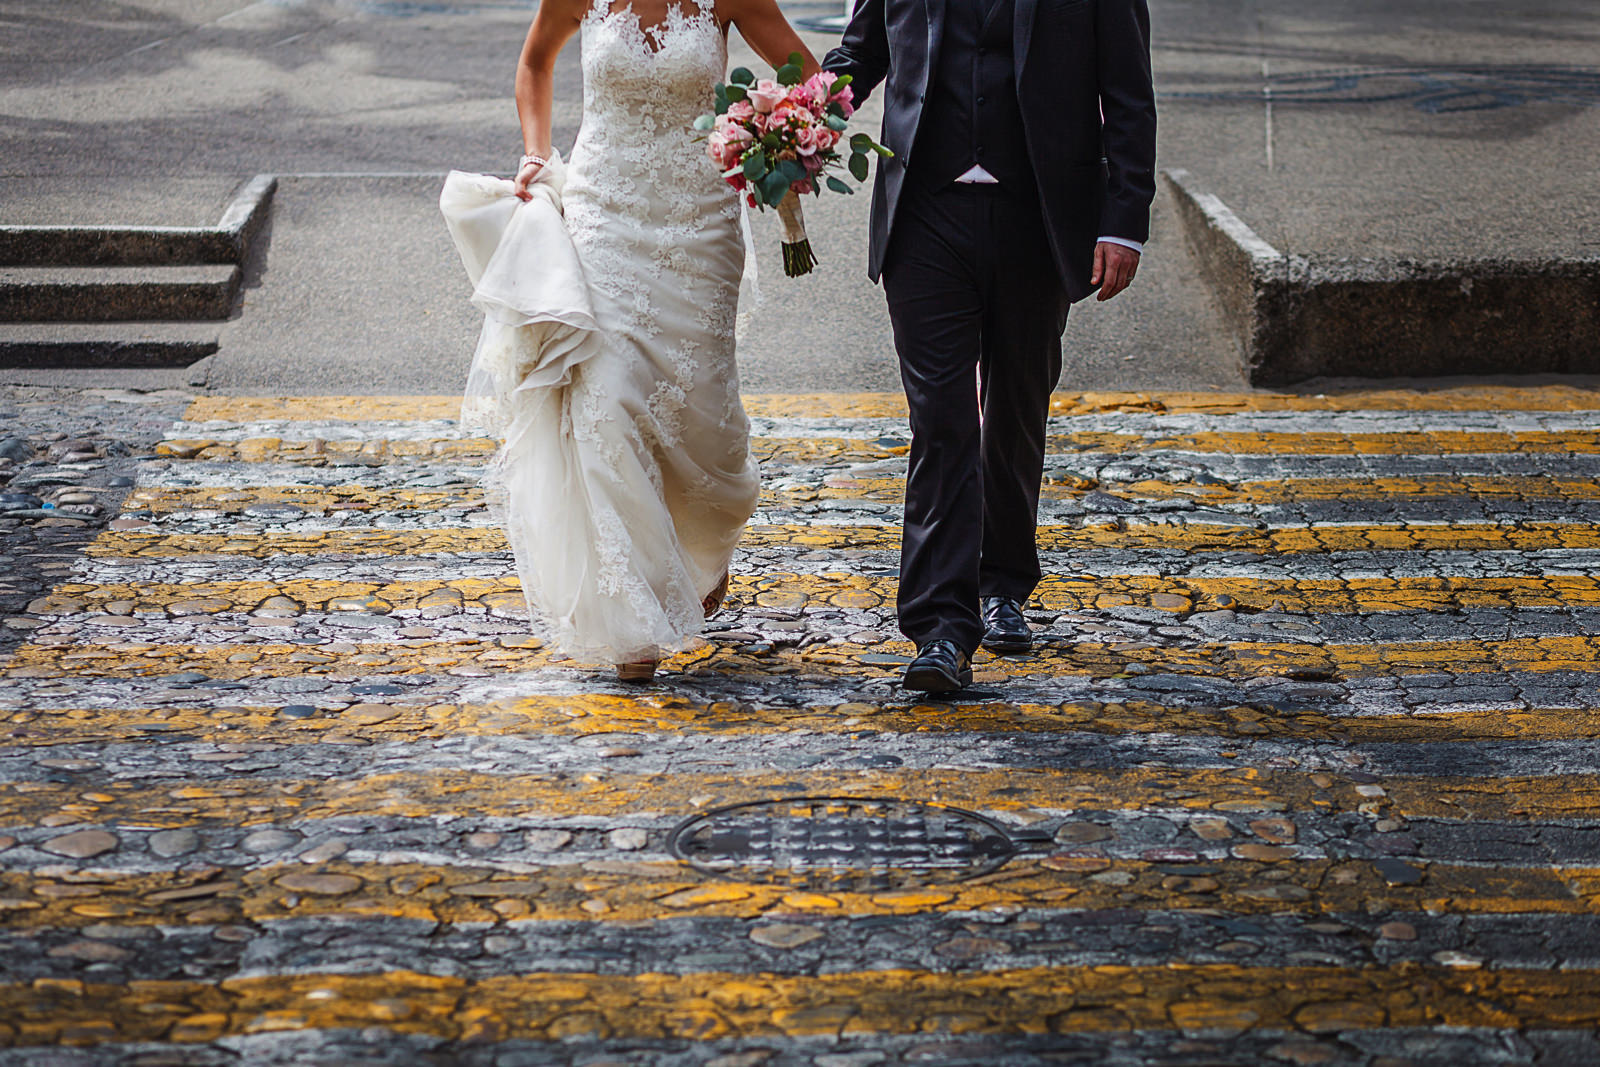 Groom and bride walking on yellow stripes downtown Puerto Vallarta, Mexico